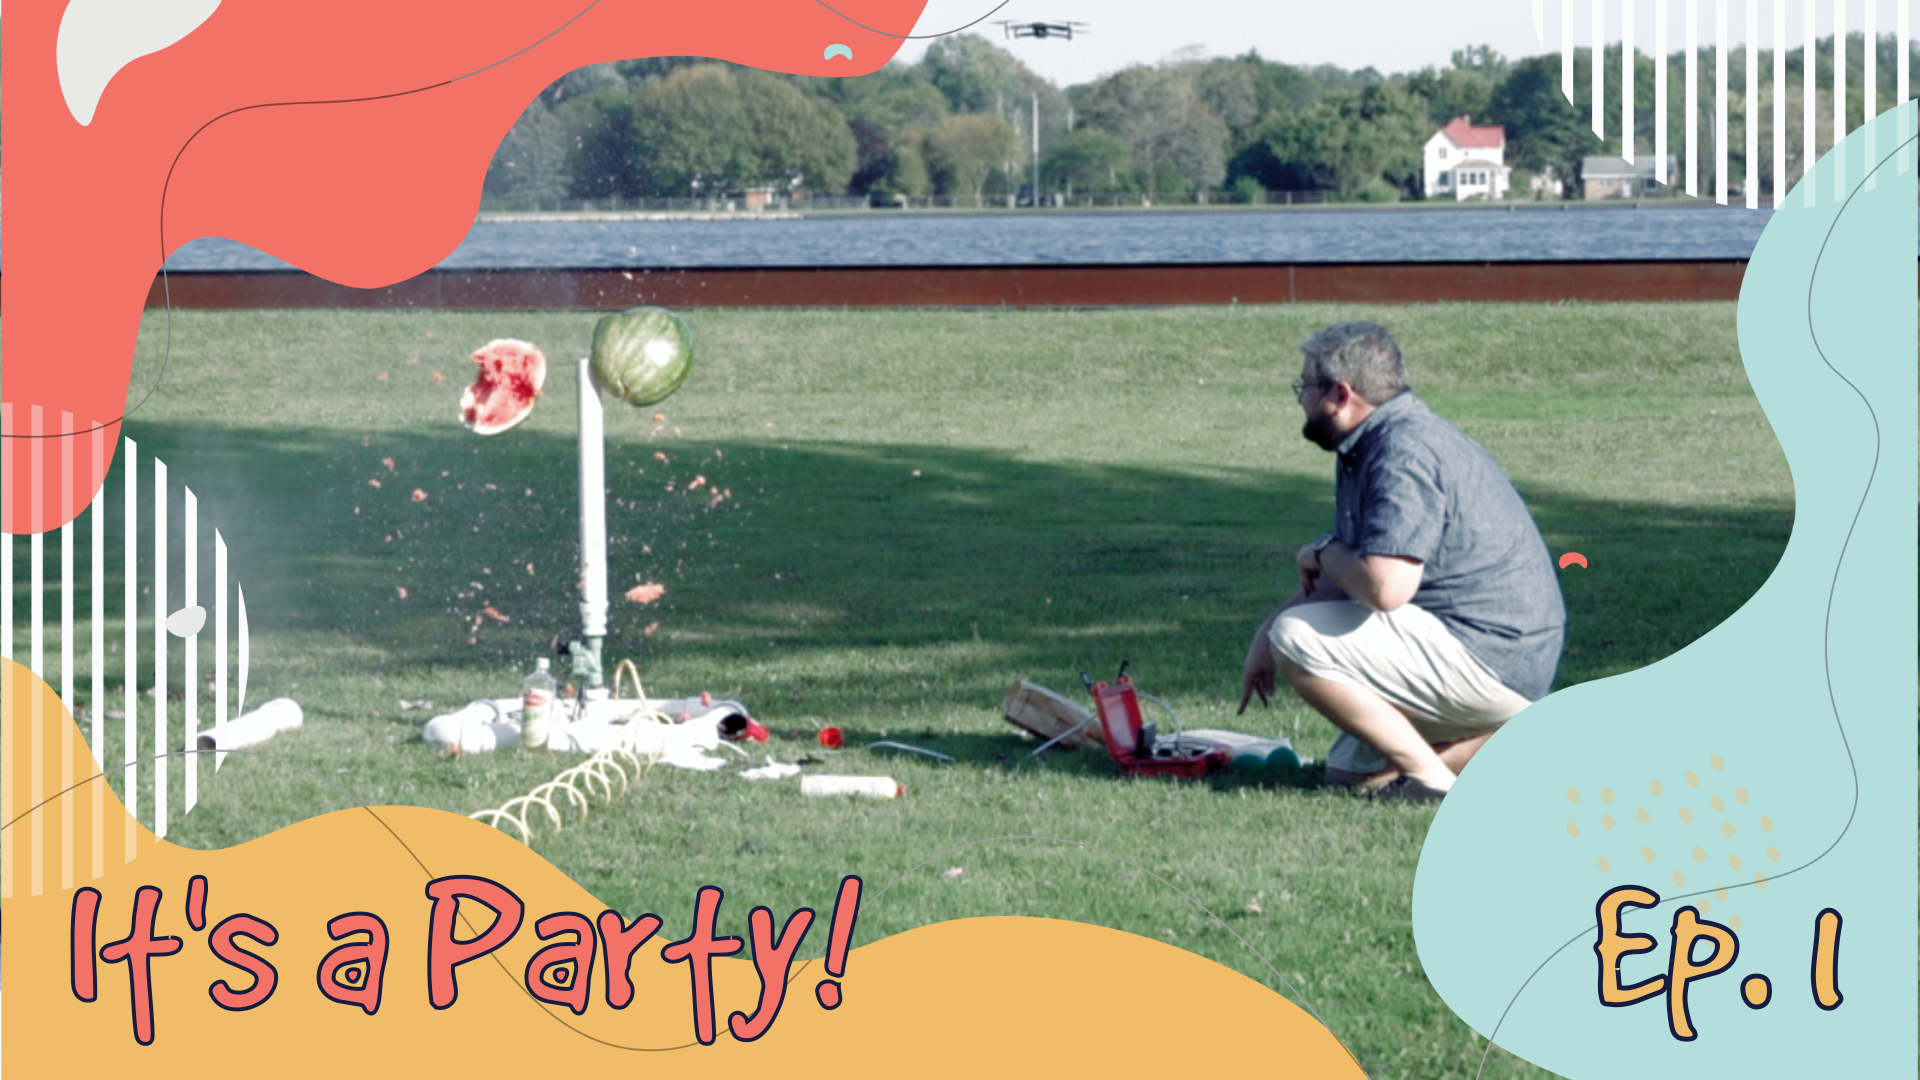 DIY Air Cannon | “It’s a Party” Ep. 1